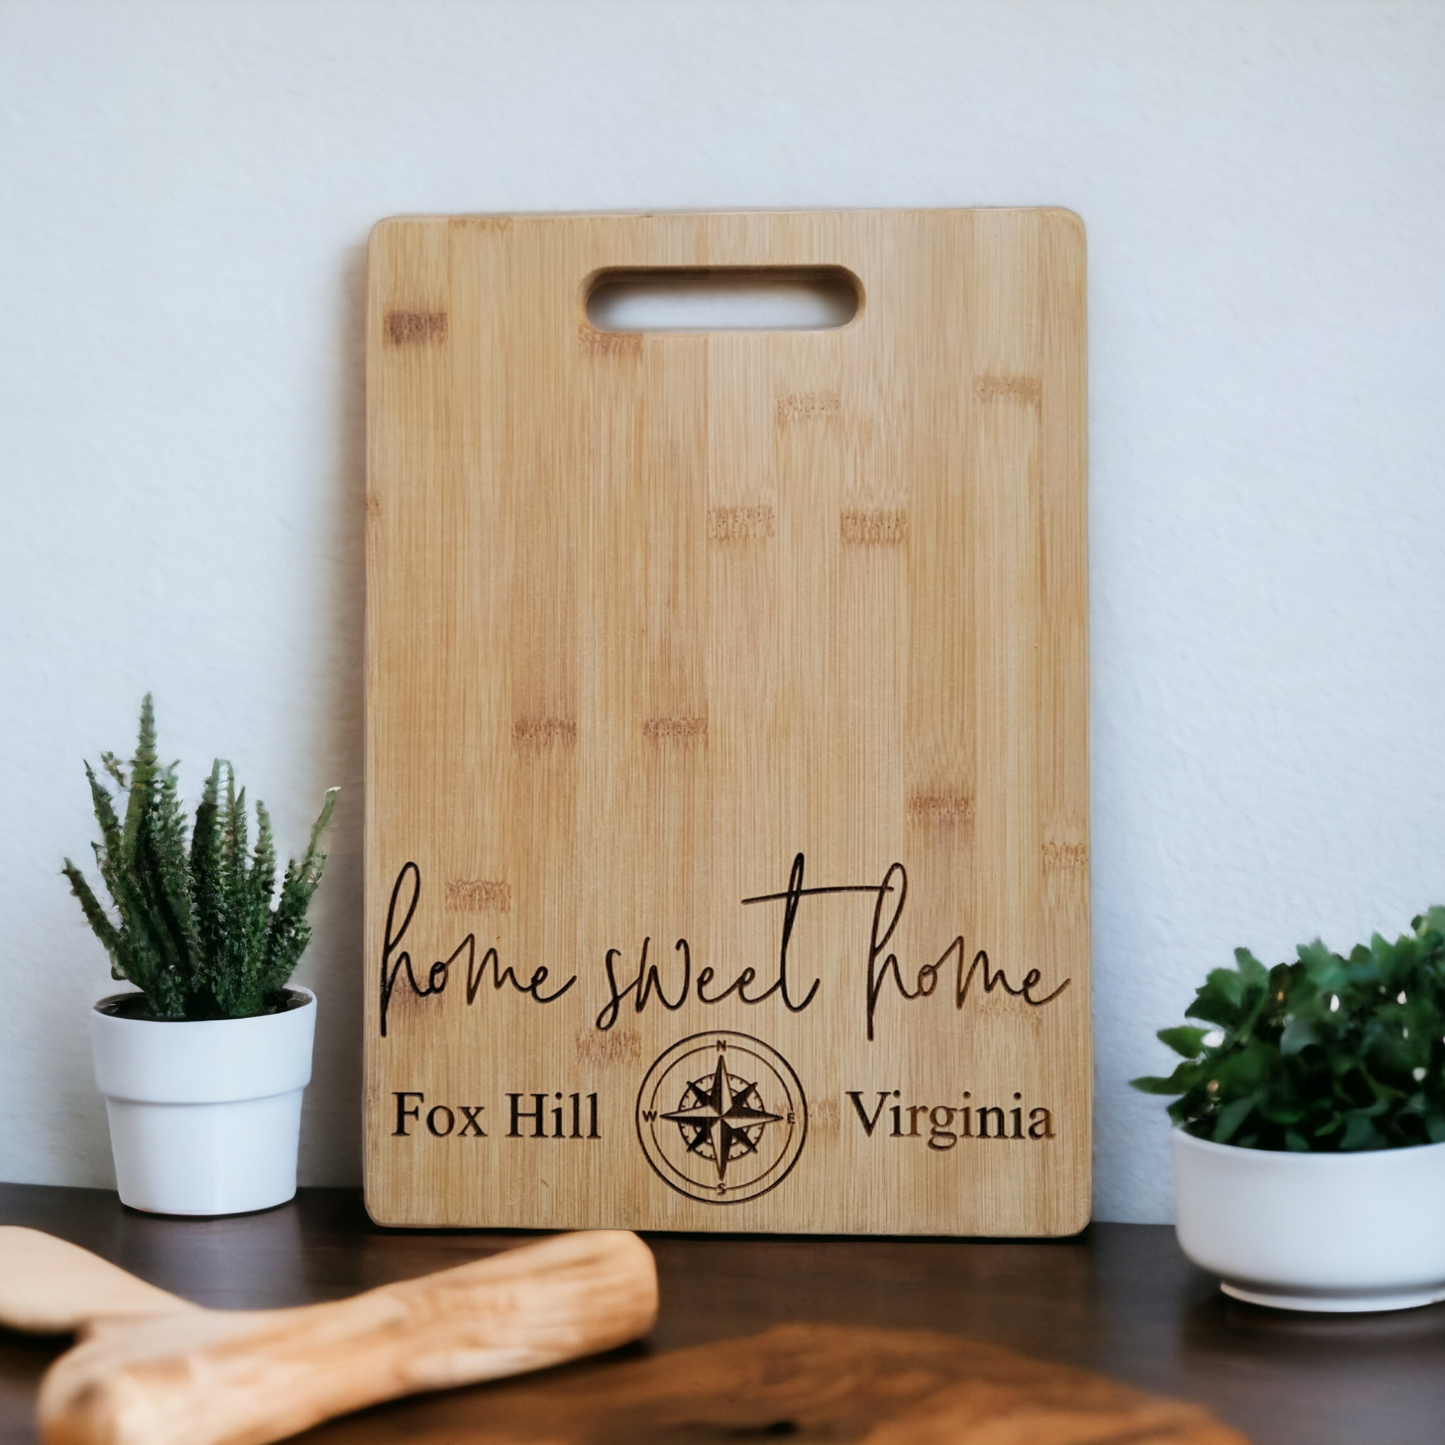 Customized Home Sweet Home Engraved Cutting Board - 13 3/4" x 9 3/4"